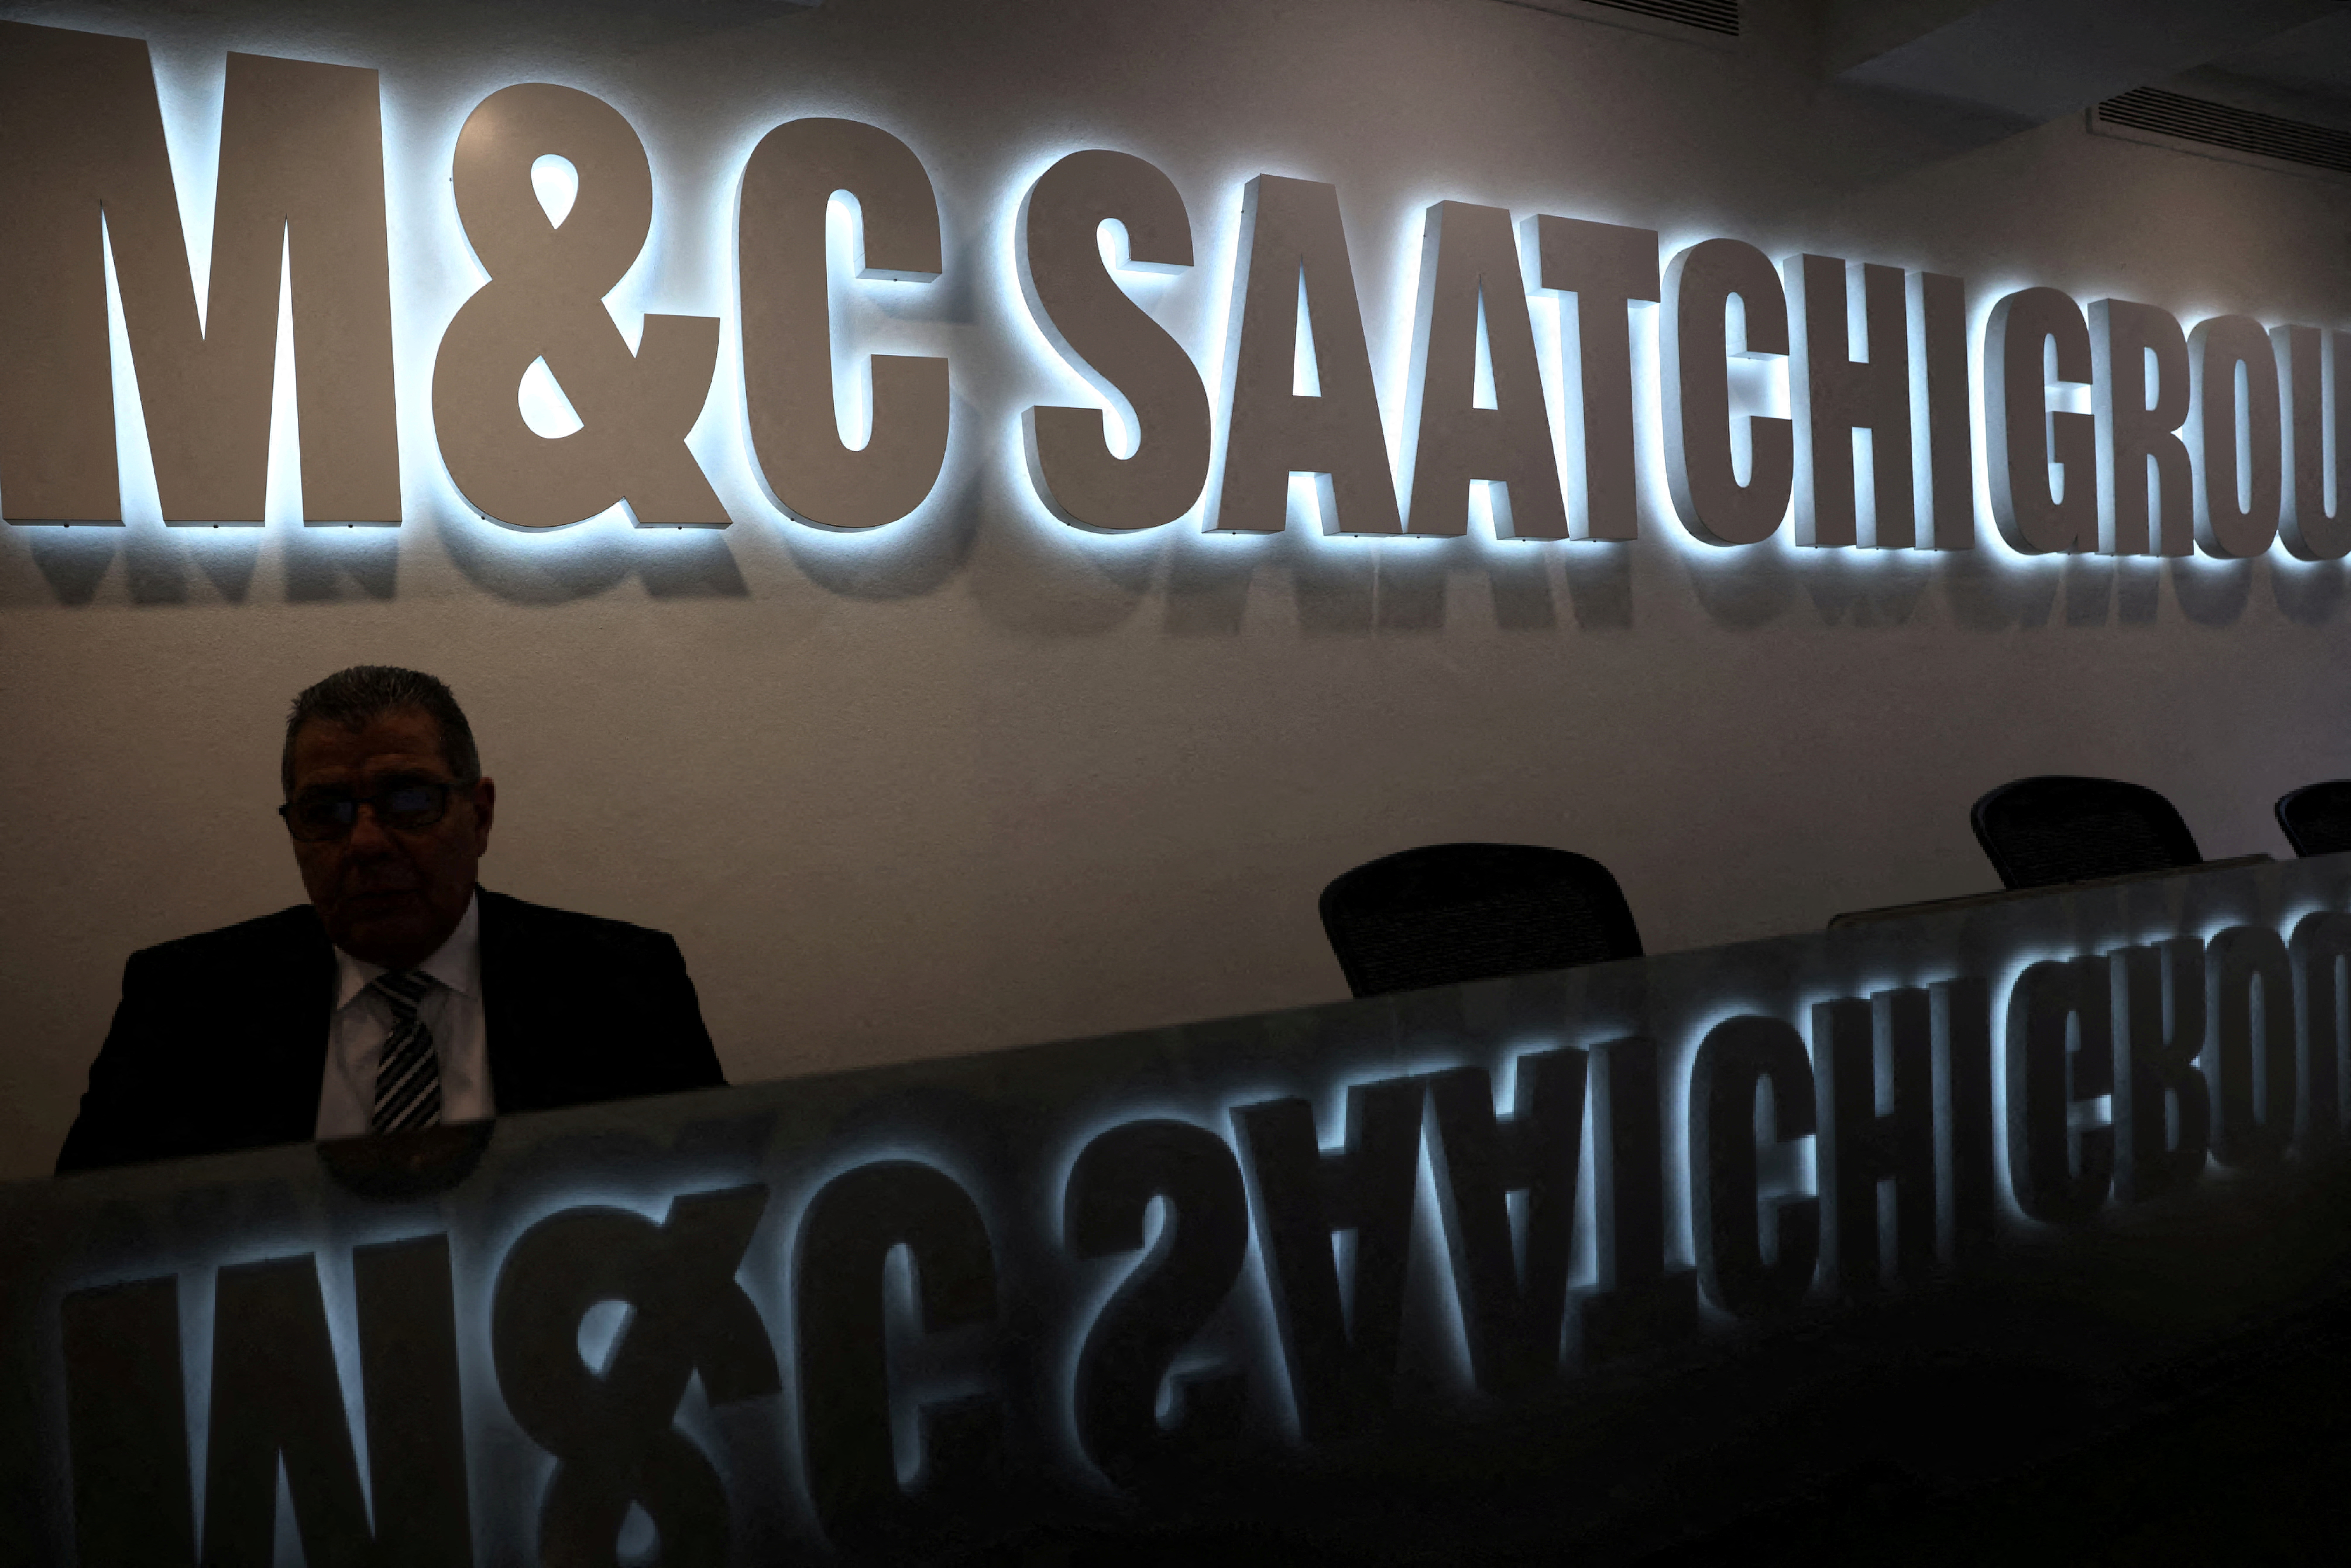 The M&C Saatchi office in central London, Britain